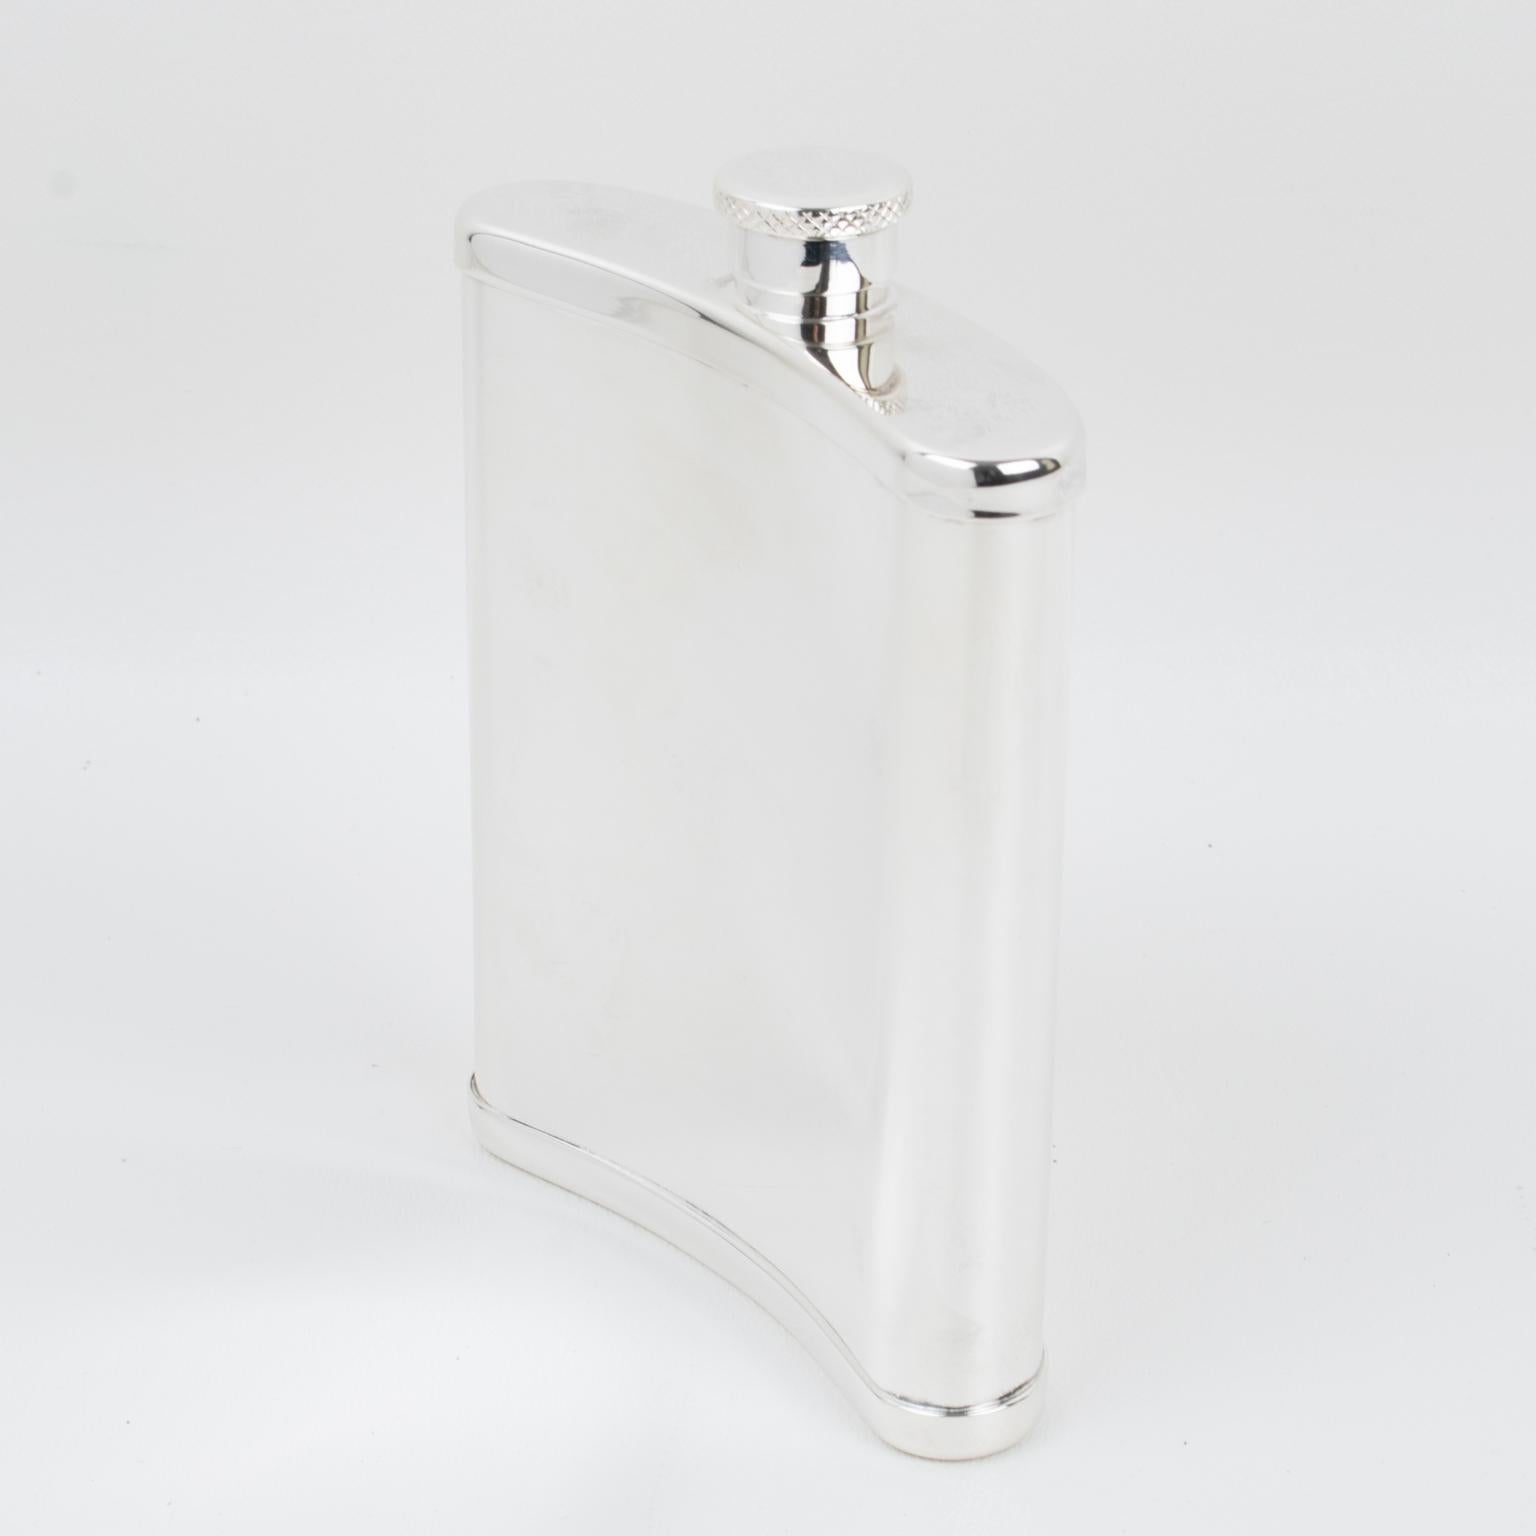 Brazilian Silver Plate Flask by St James Brazil for D.B. Howes & Son